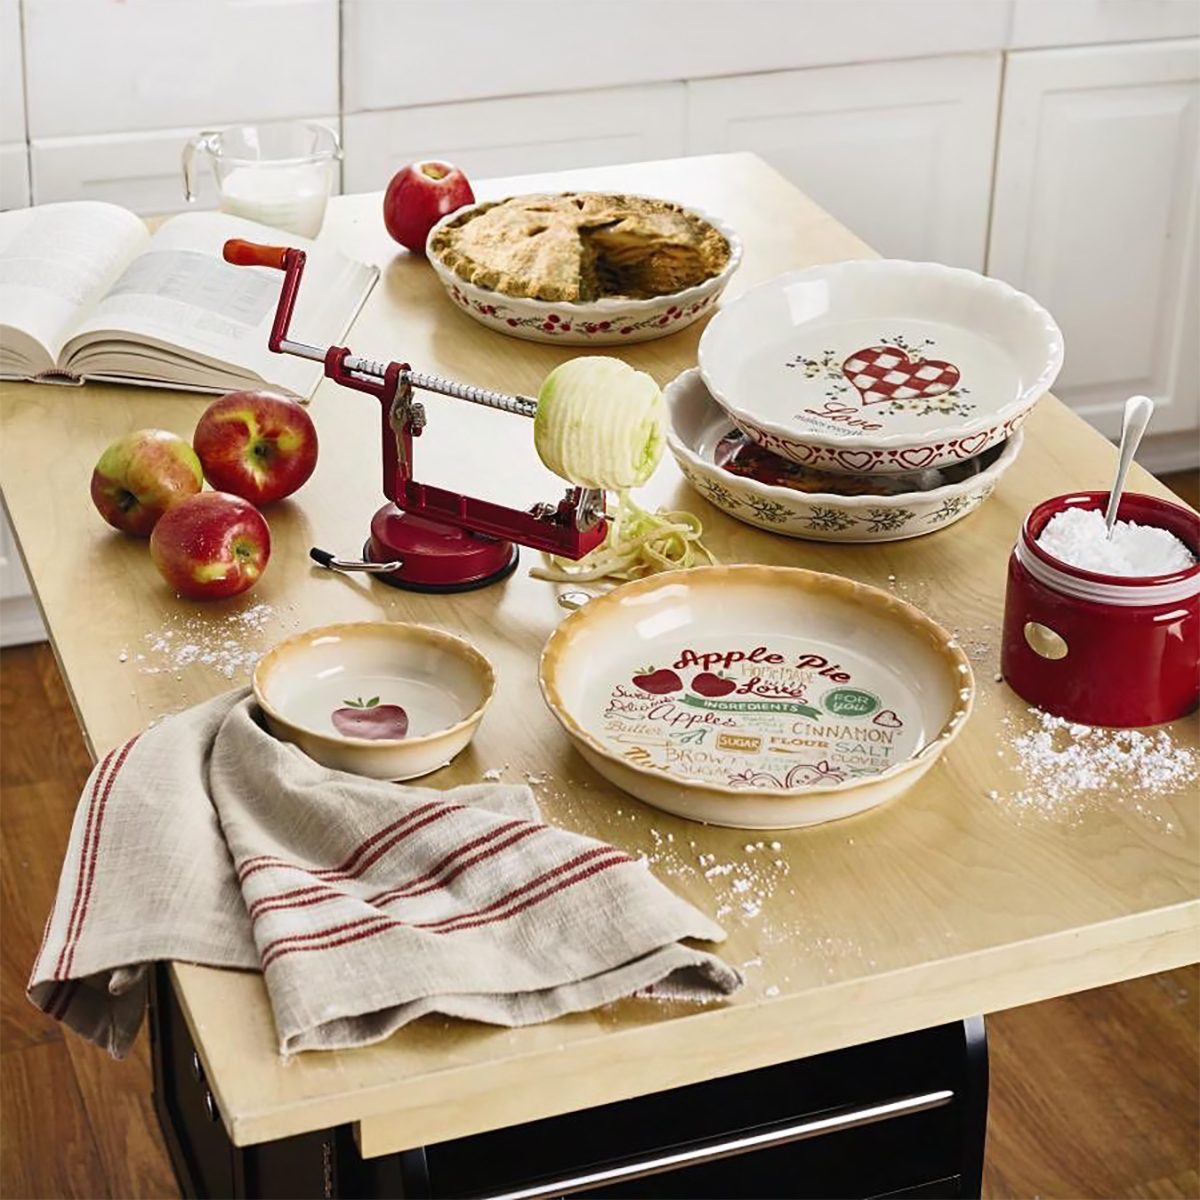 Sale & Clearance Kitchen Tools & Decor